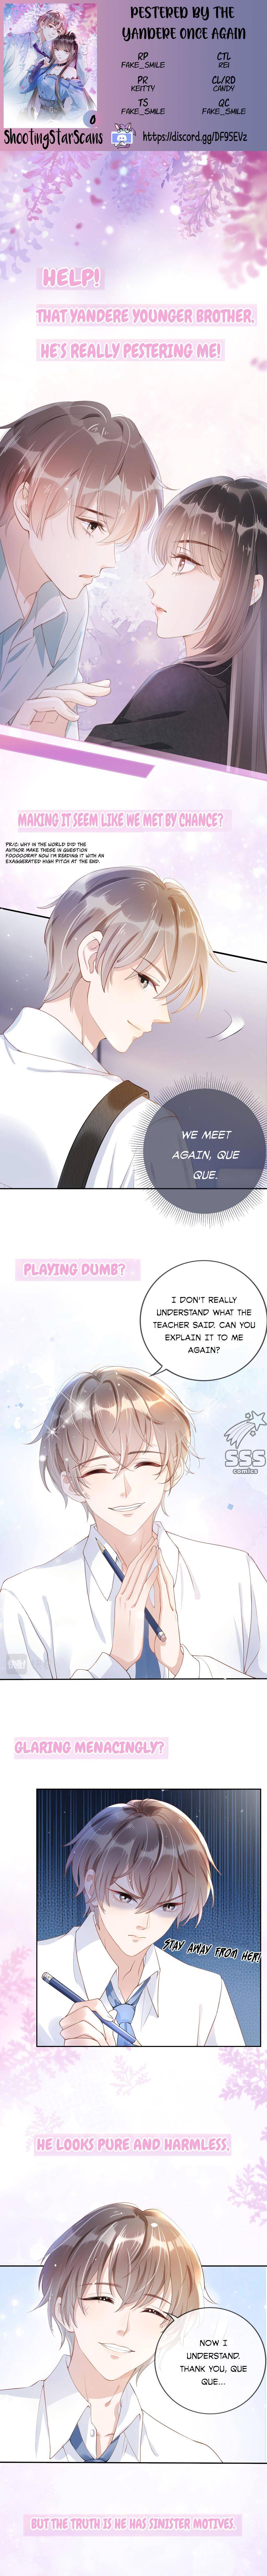 Pestered By The Yandere Once Again - chapter 0 - #2